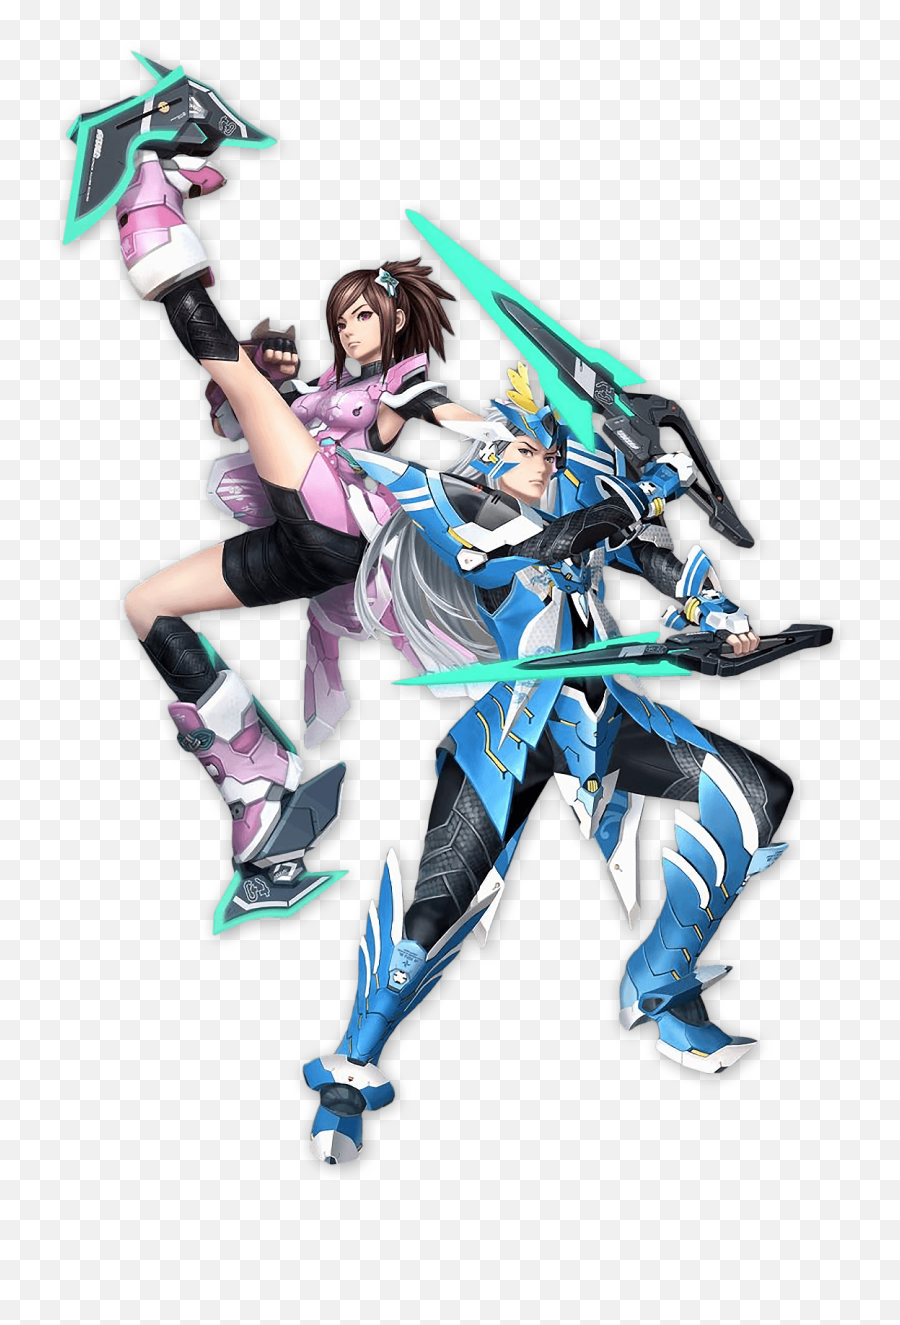 Phantasy Star Online 2 Episode 3 Announced With Bouncer - Phantasy Star Online Transparent Emoji,Animated Fish Fighter Emoticon Image